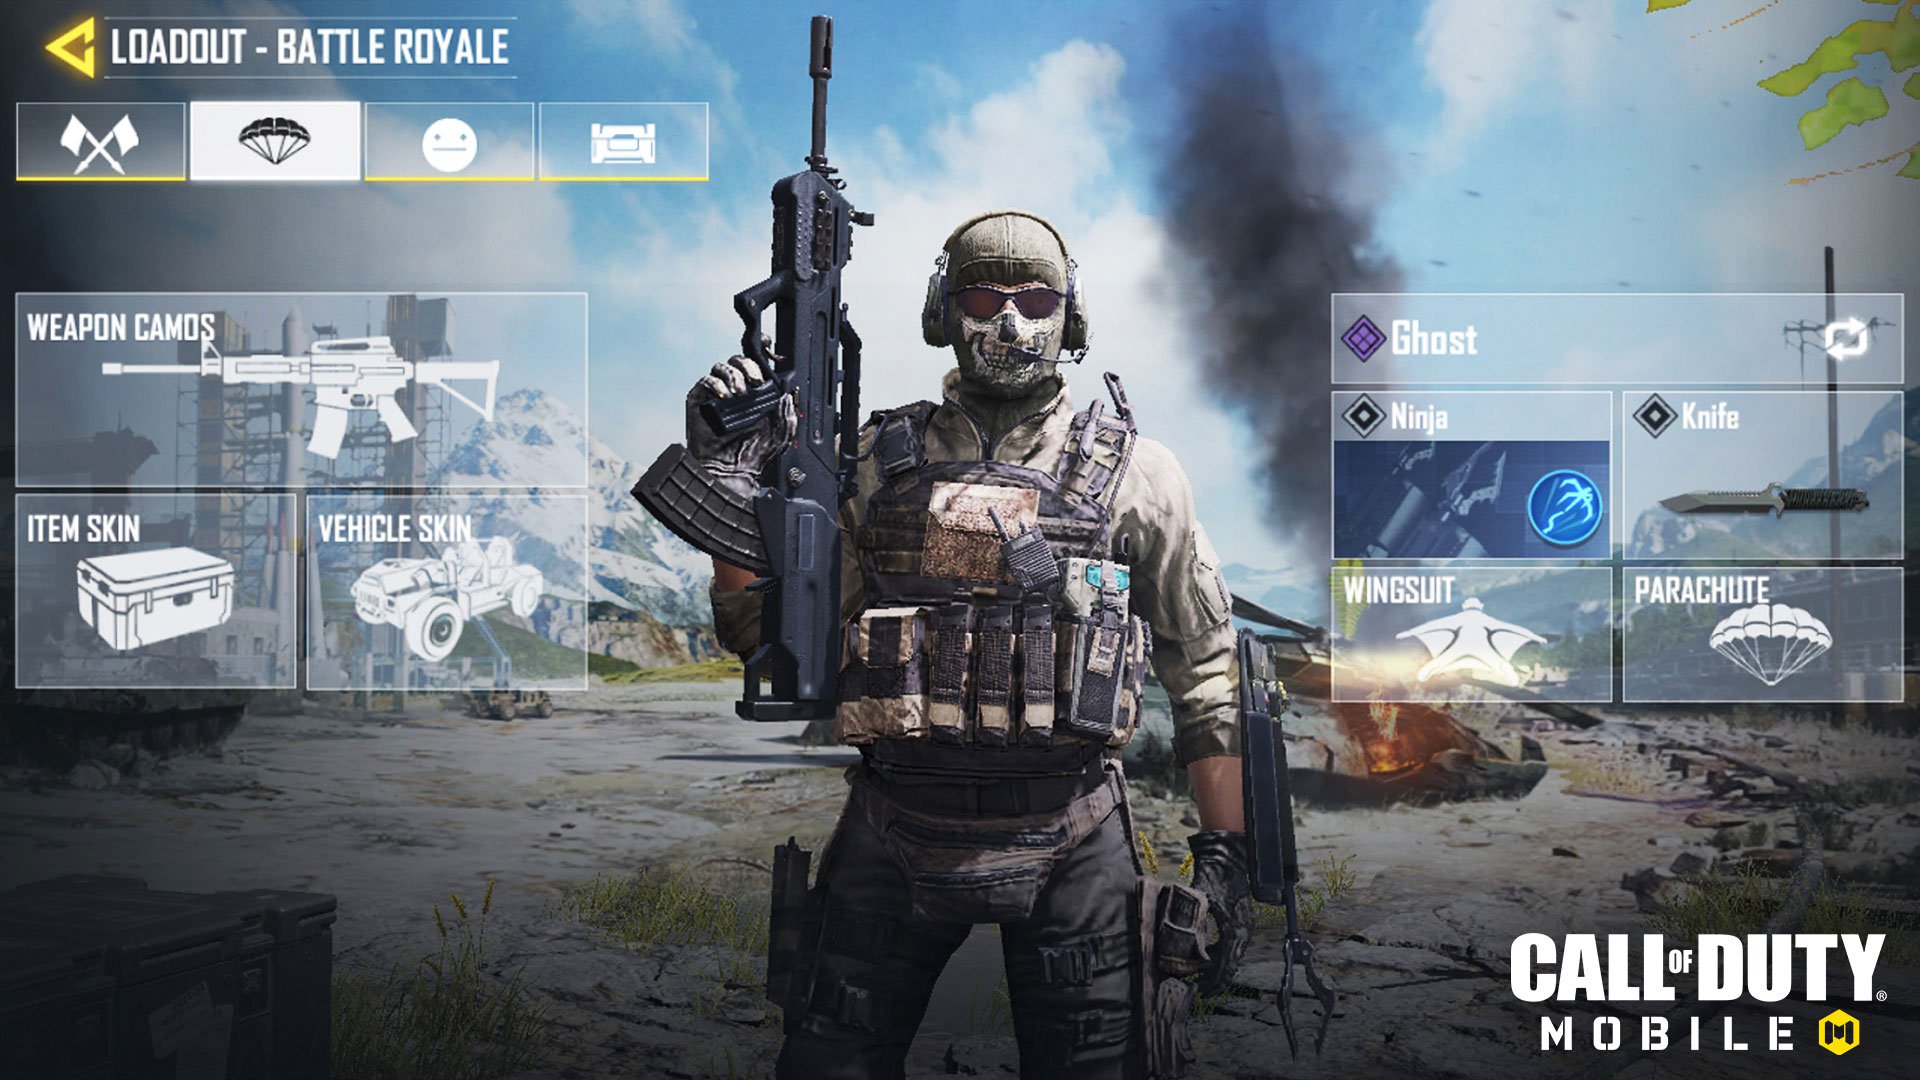 How Does Call of Duty Mobile Compare To PUBG? Here's A Breakdown - 